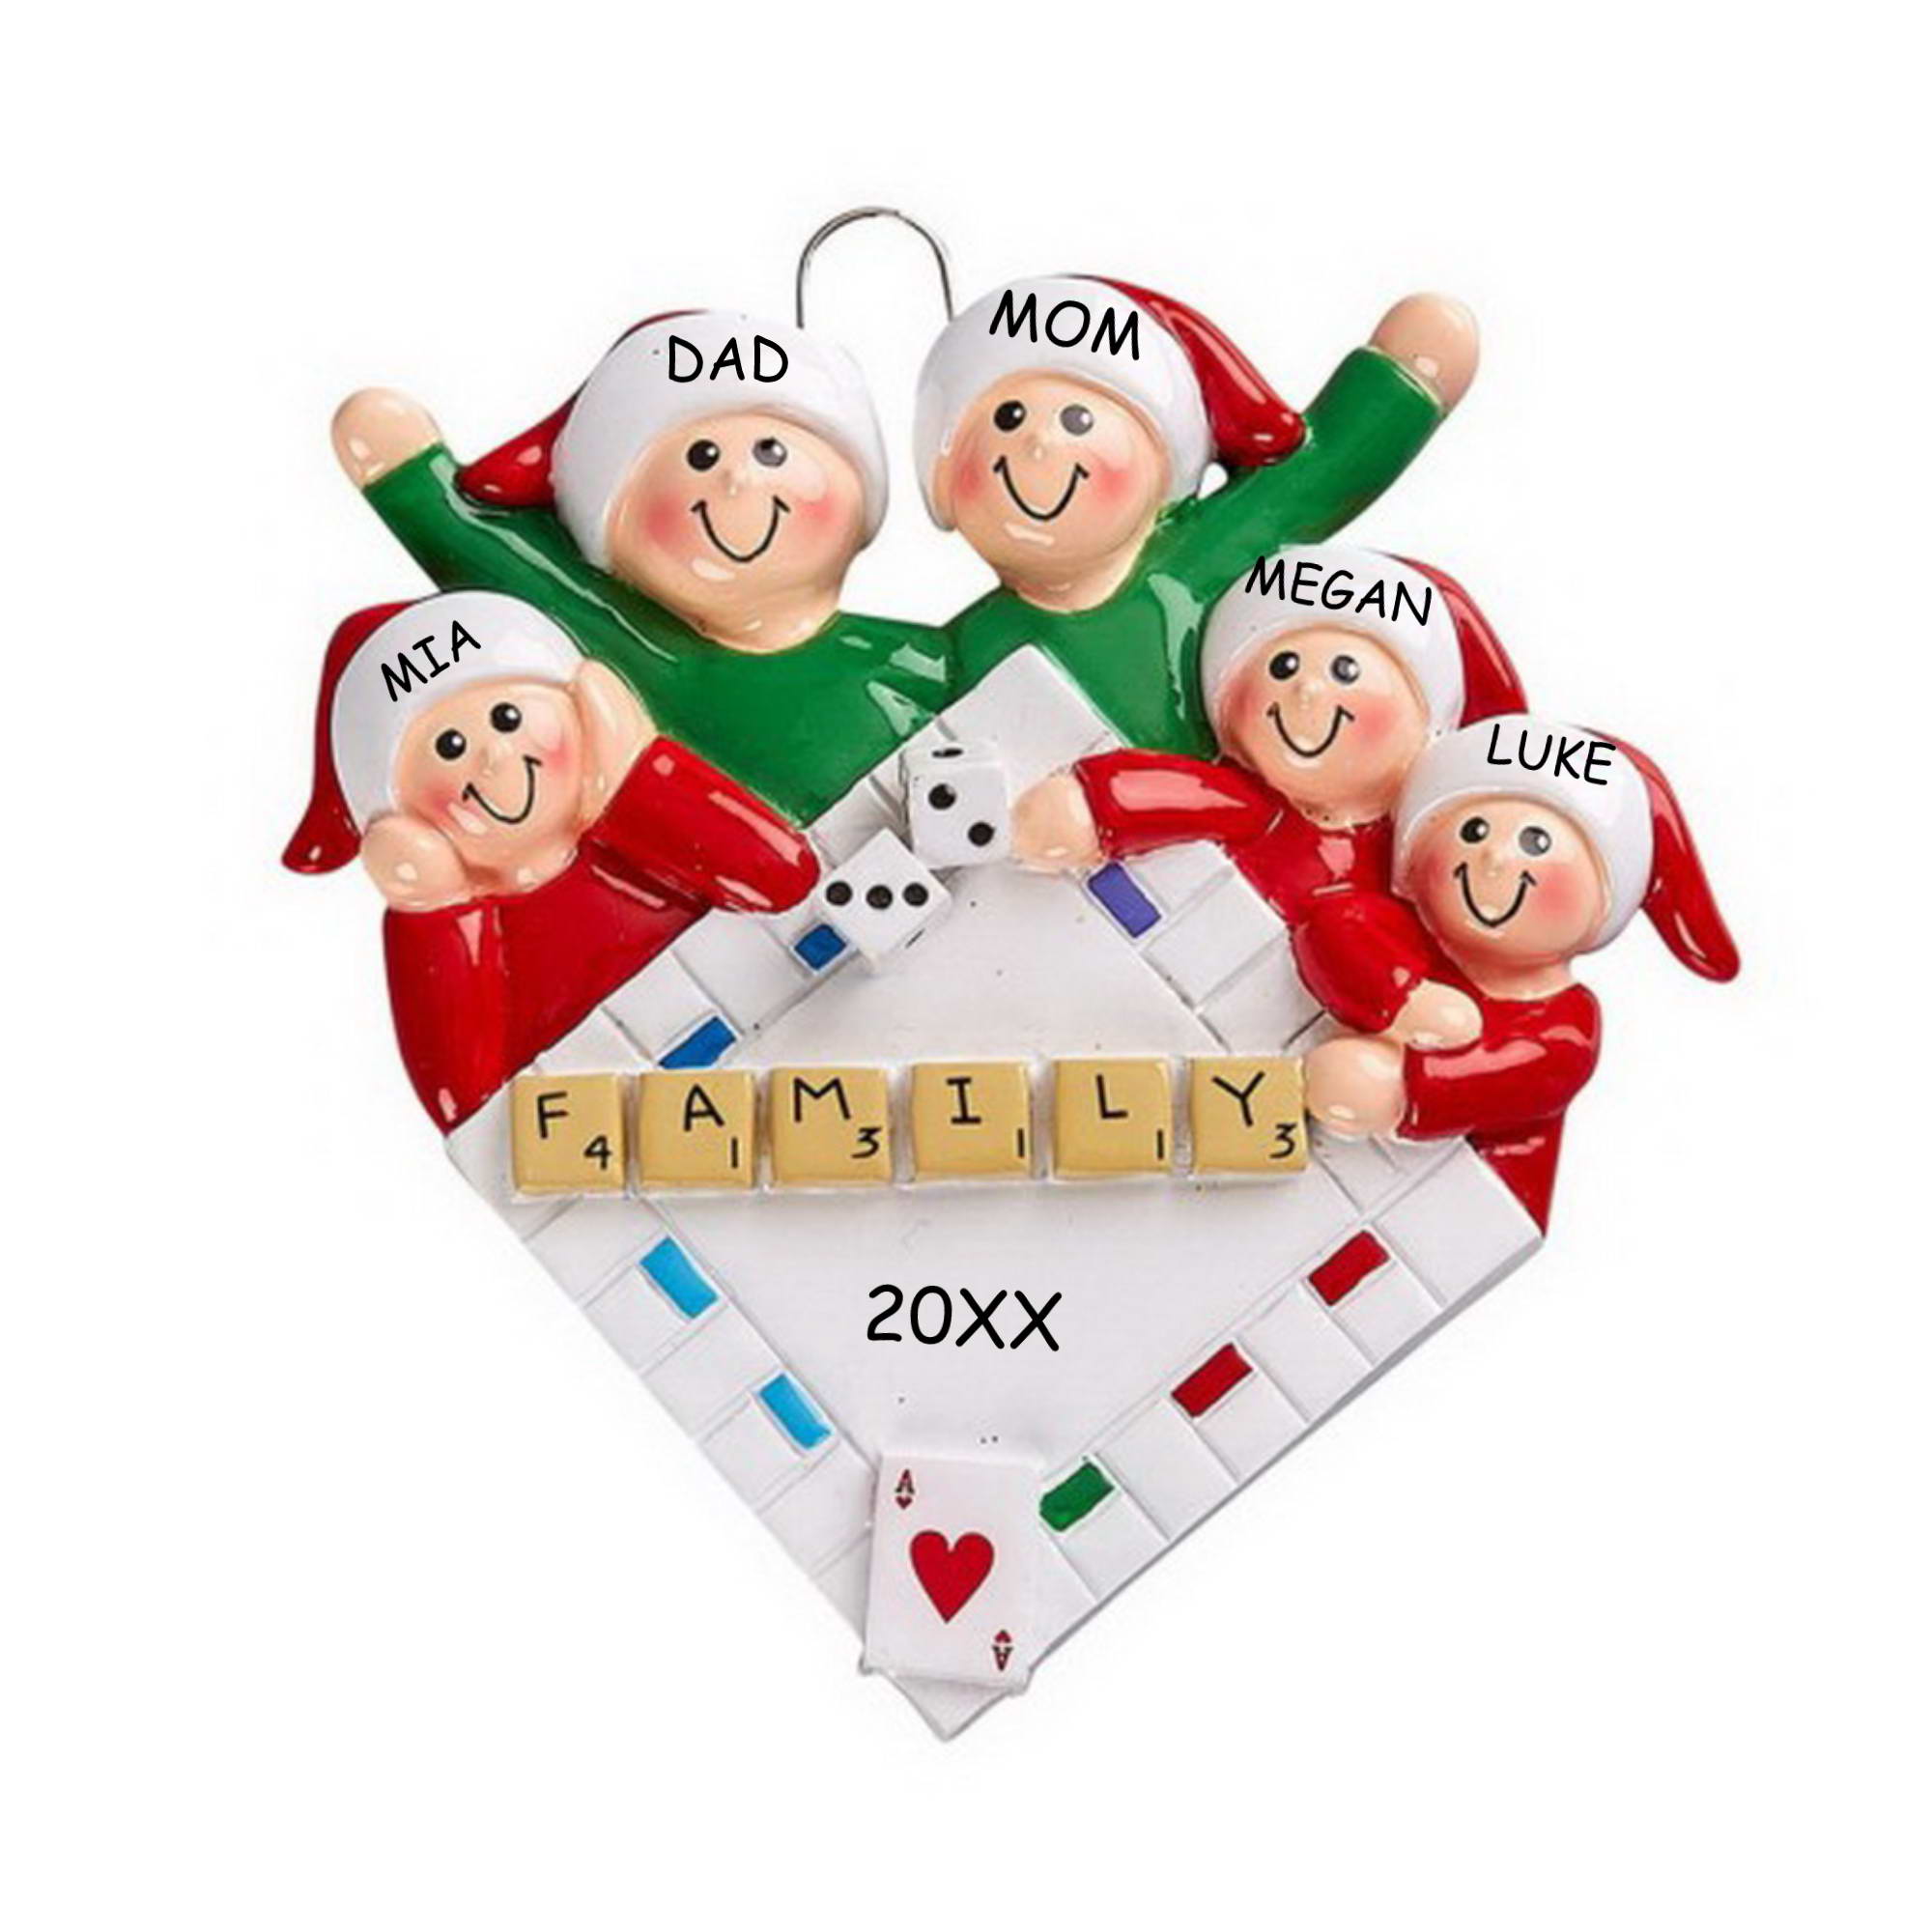 Personalized Game Night Family Christmas Ornament - Family of 5